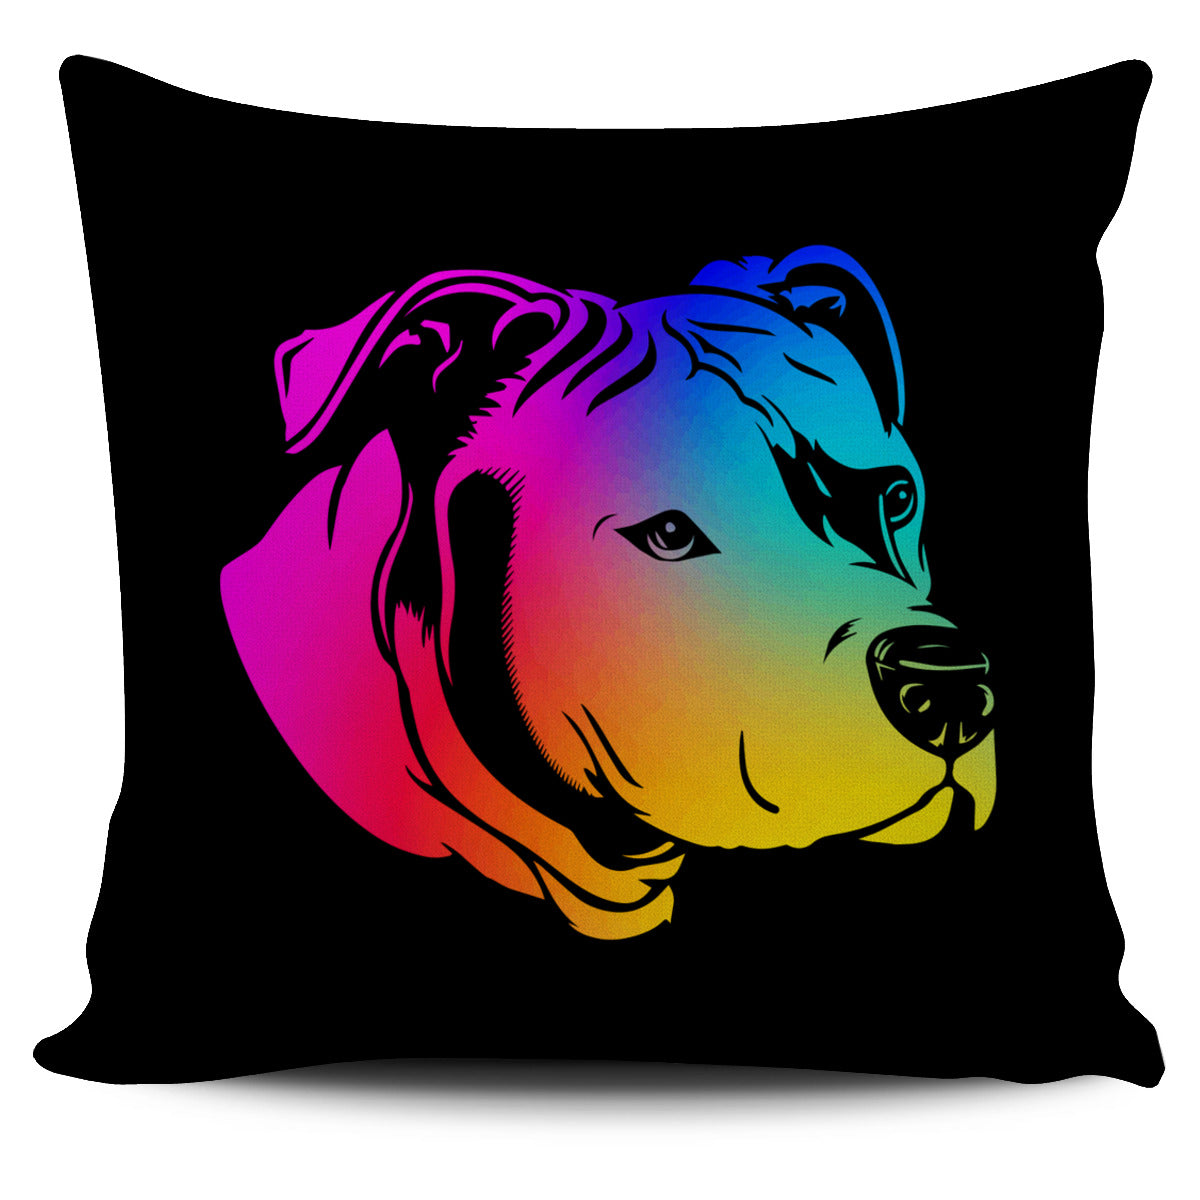 Rainbow Pit Pillow Cover